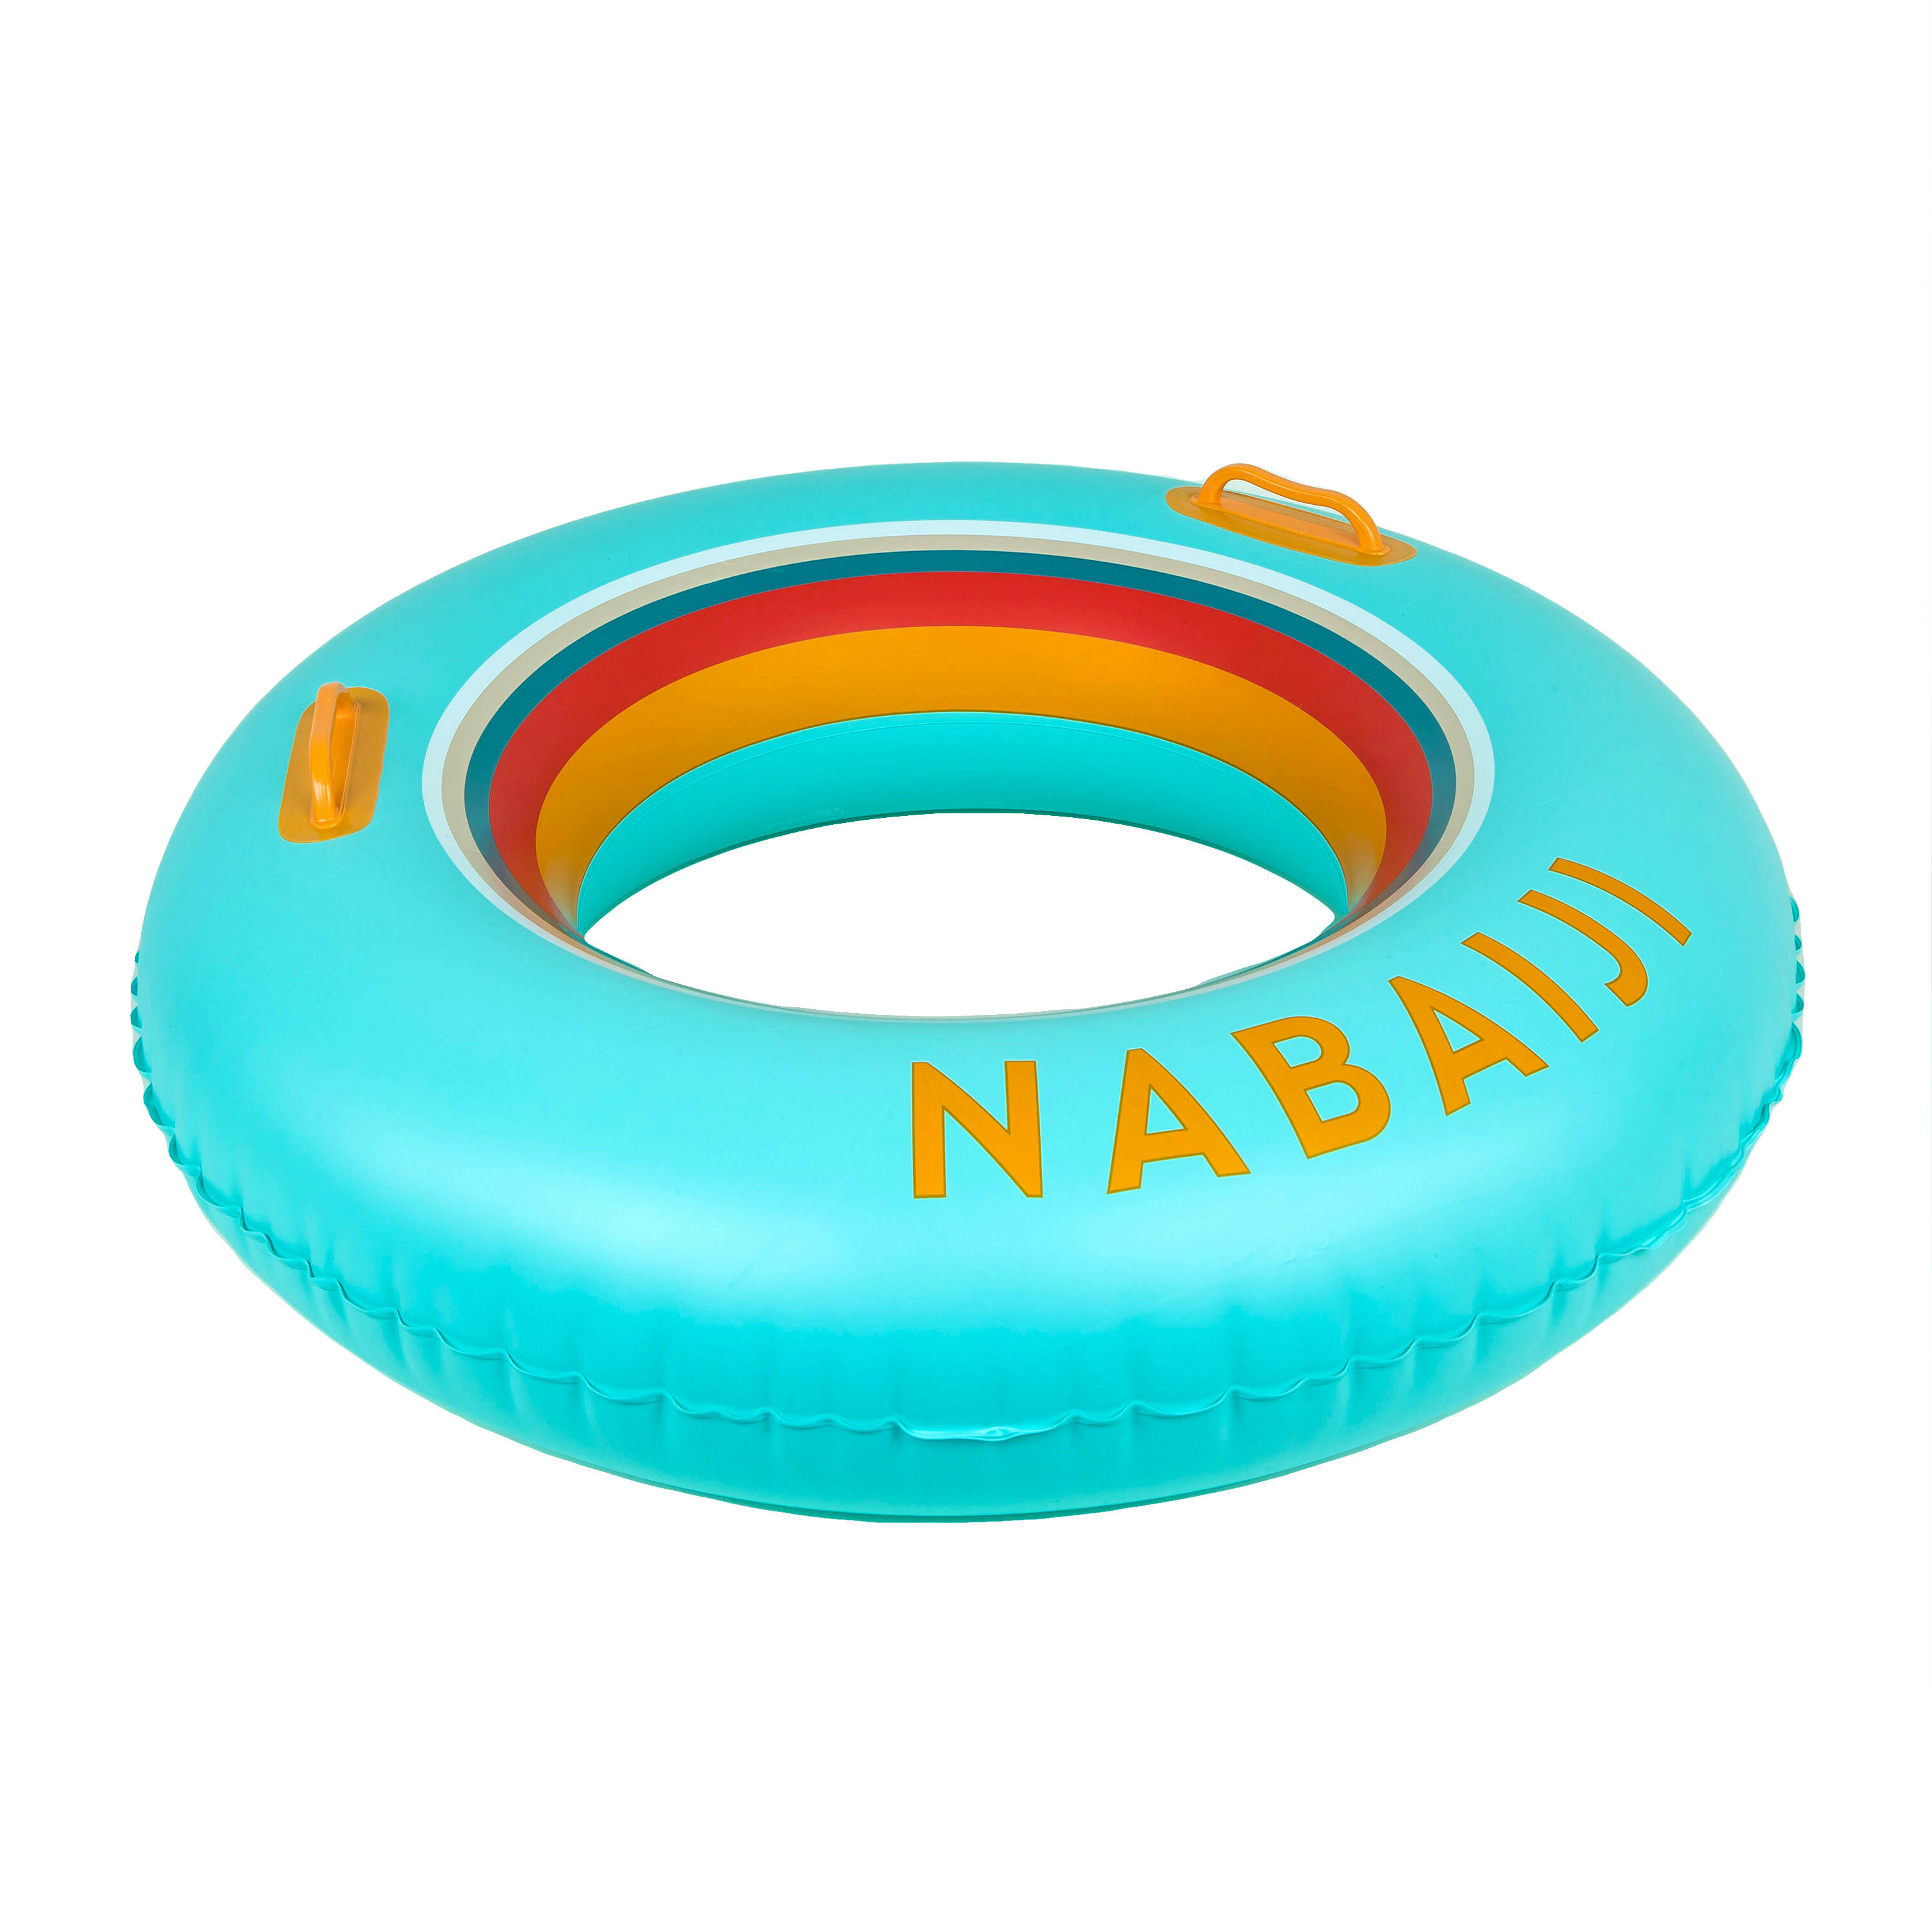 Large 92 cm inflatable printed pool ring with comfort grips 7/7